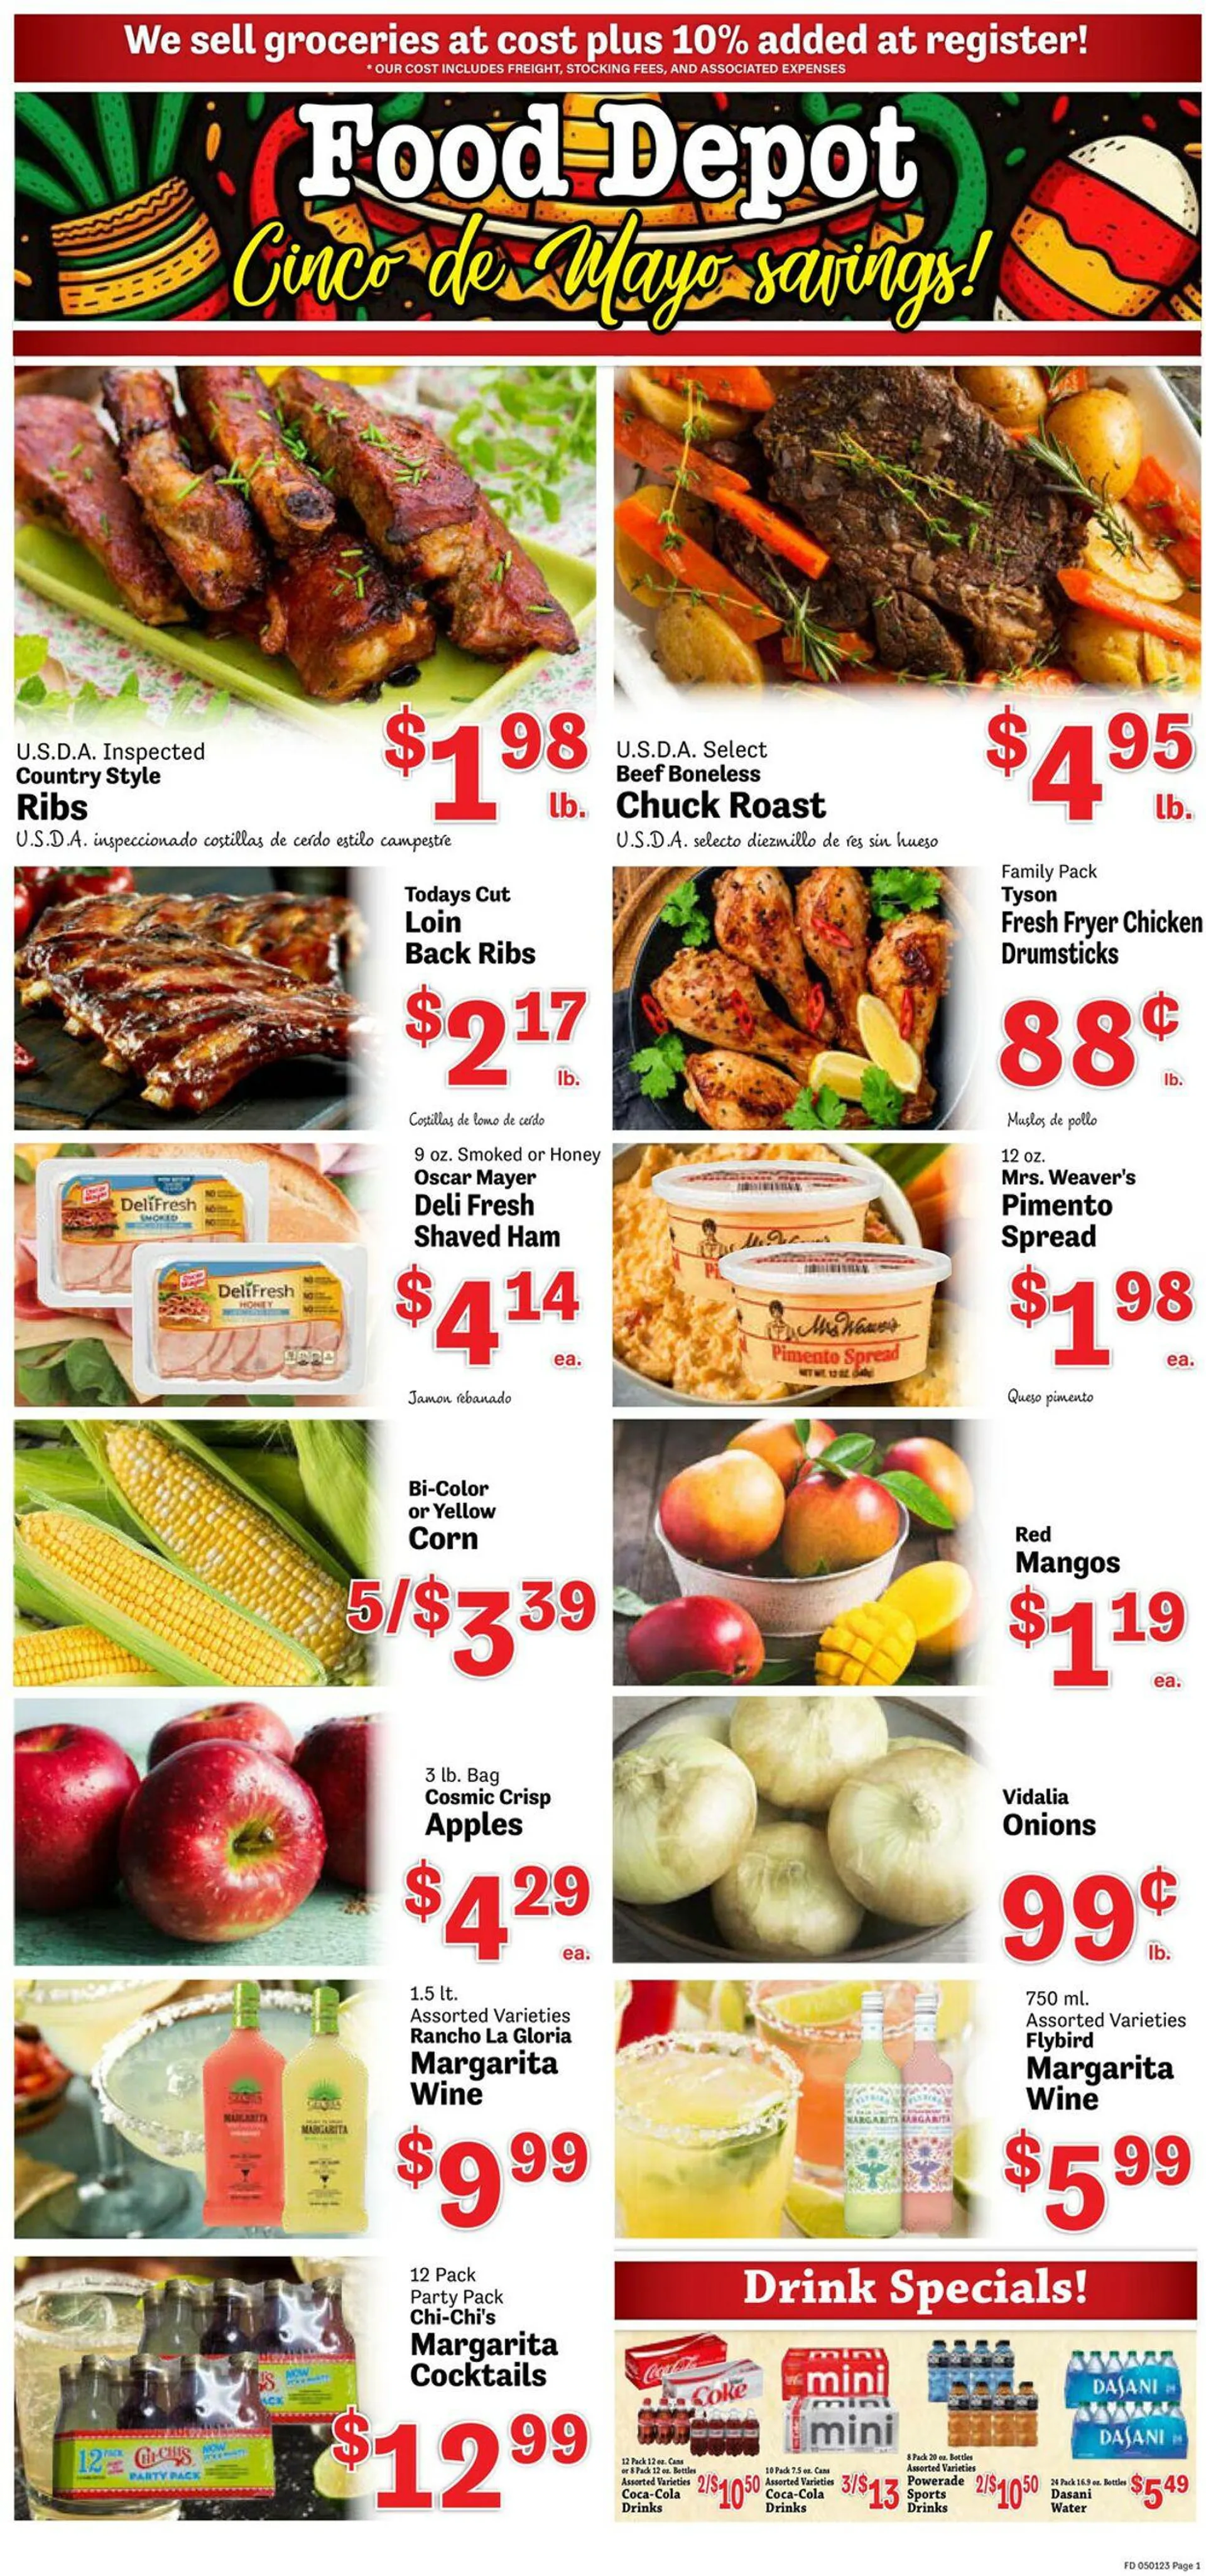 Food Depot Current weekly ad - 1